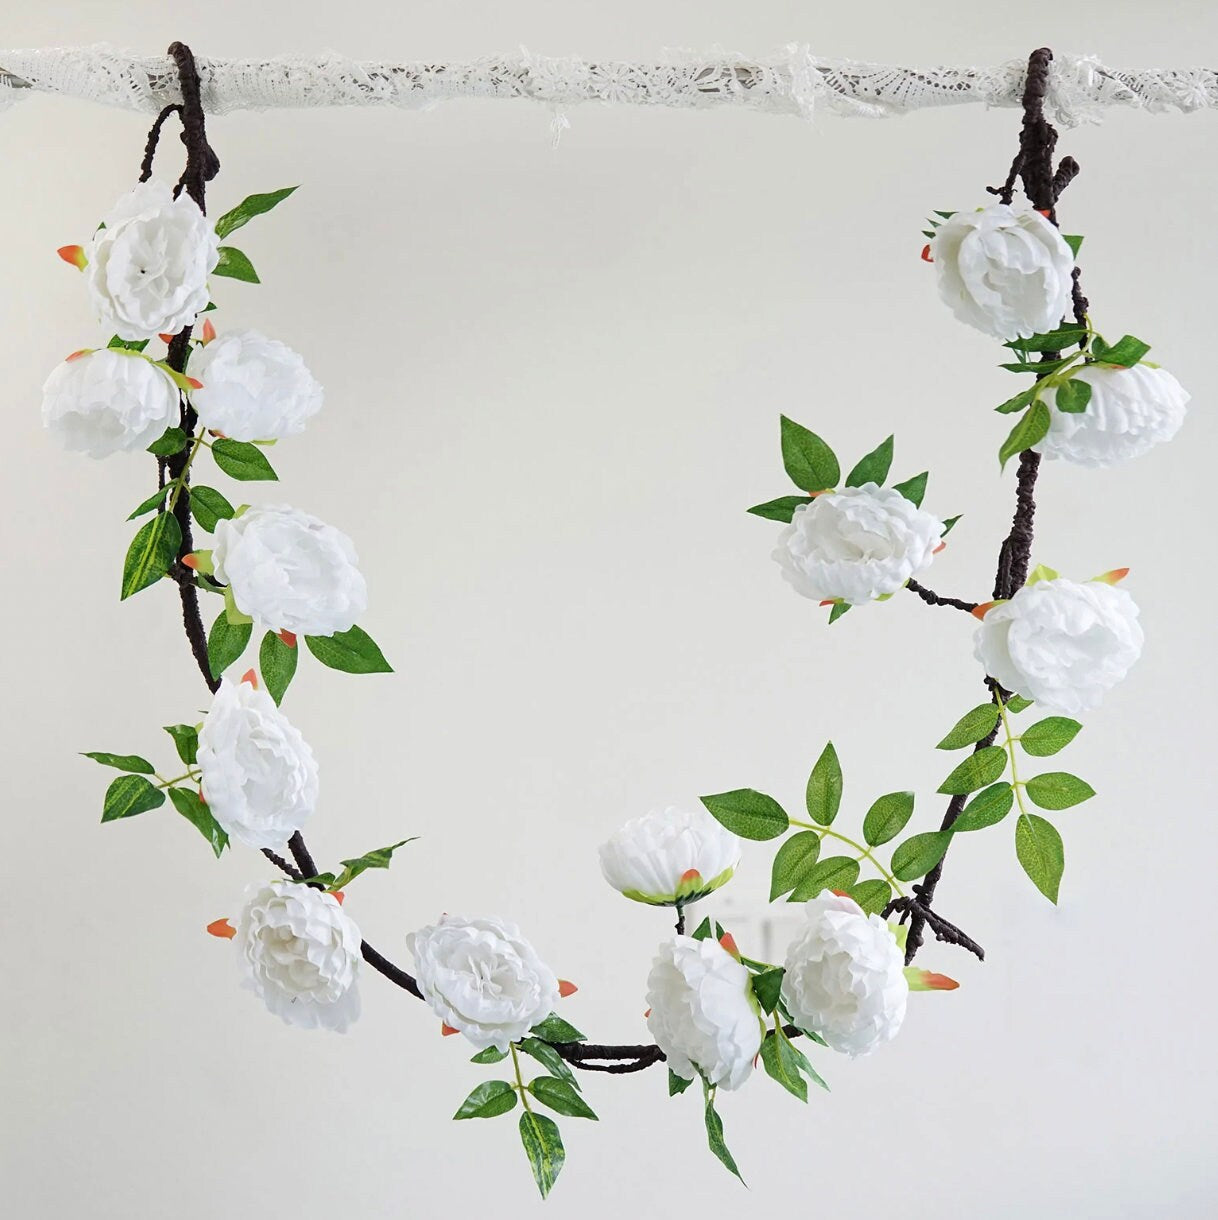 FOUR 6 FT. White Peony Garland Vine Spring Decor Easter Floral Arrangements Wedding Ceremony Outdoor Hanging Flowers Faux Ceiling Wholesale